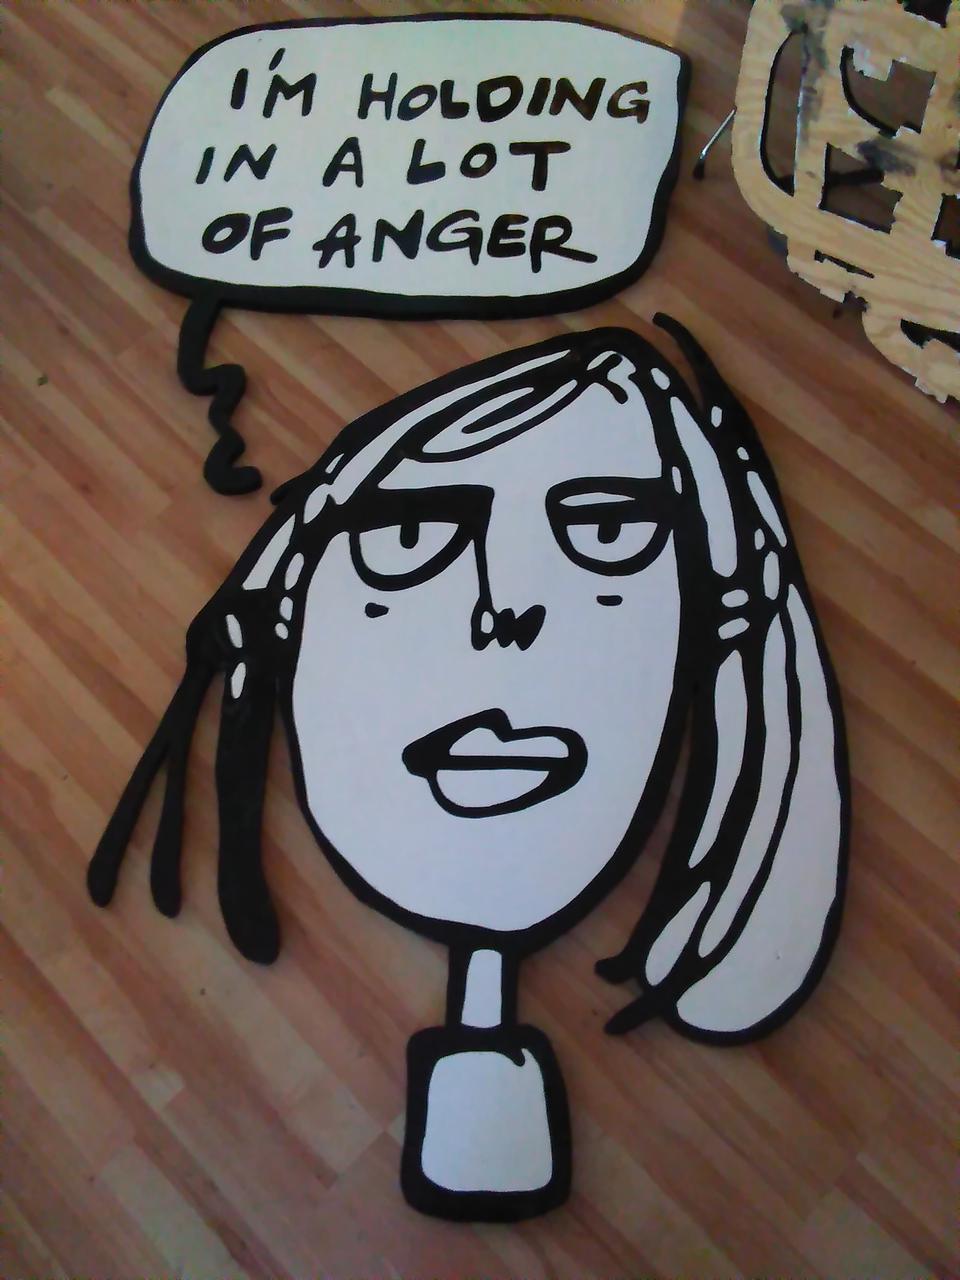 I'm Holding In A Lot Of Anger painting by David Rhoden